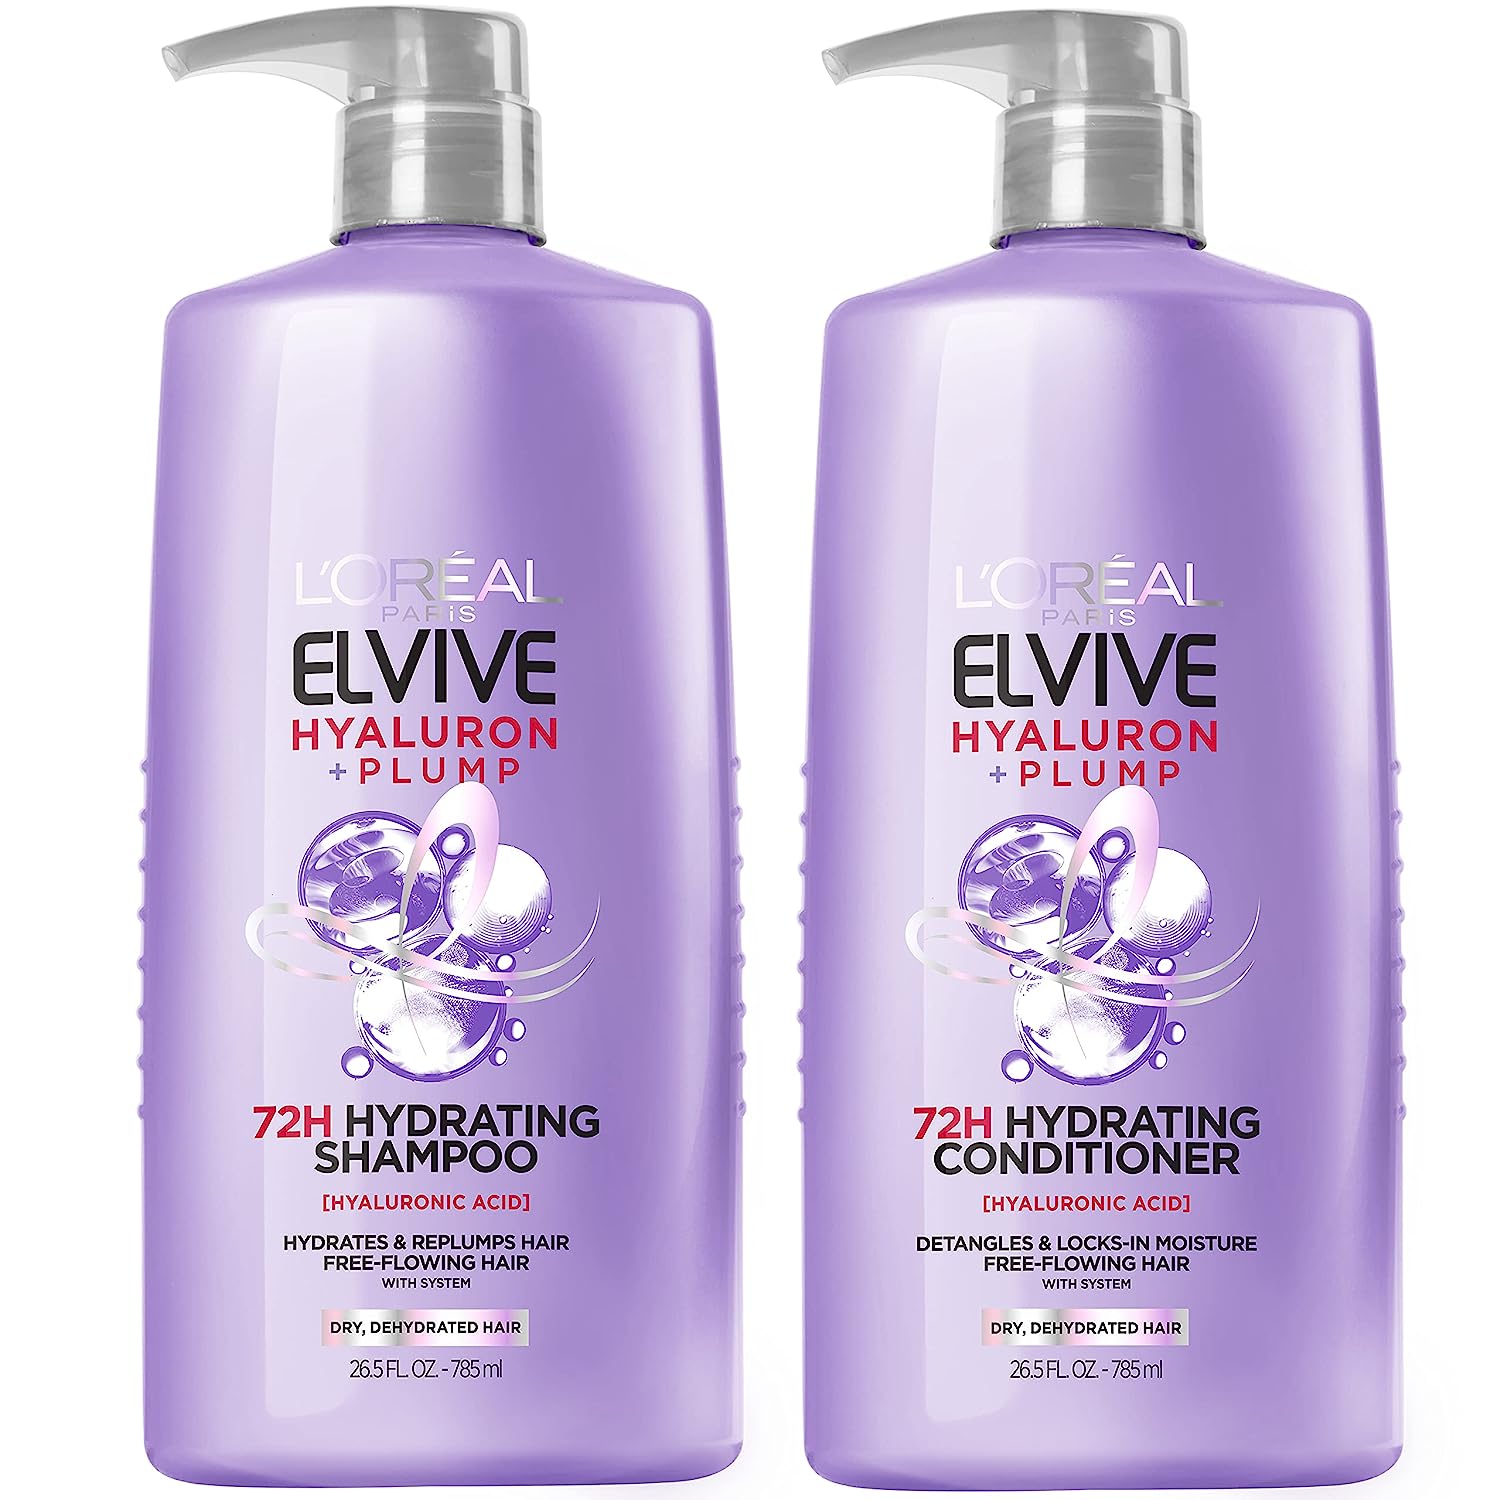 L'Oreal Paris Elvive Hyaluron Plump Shampoo and [...]